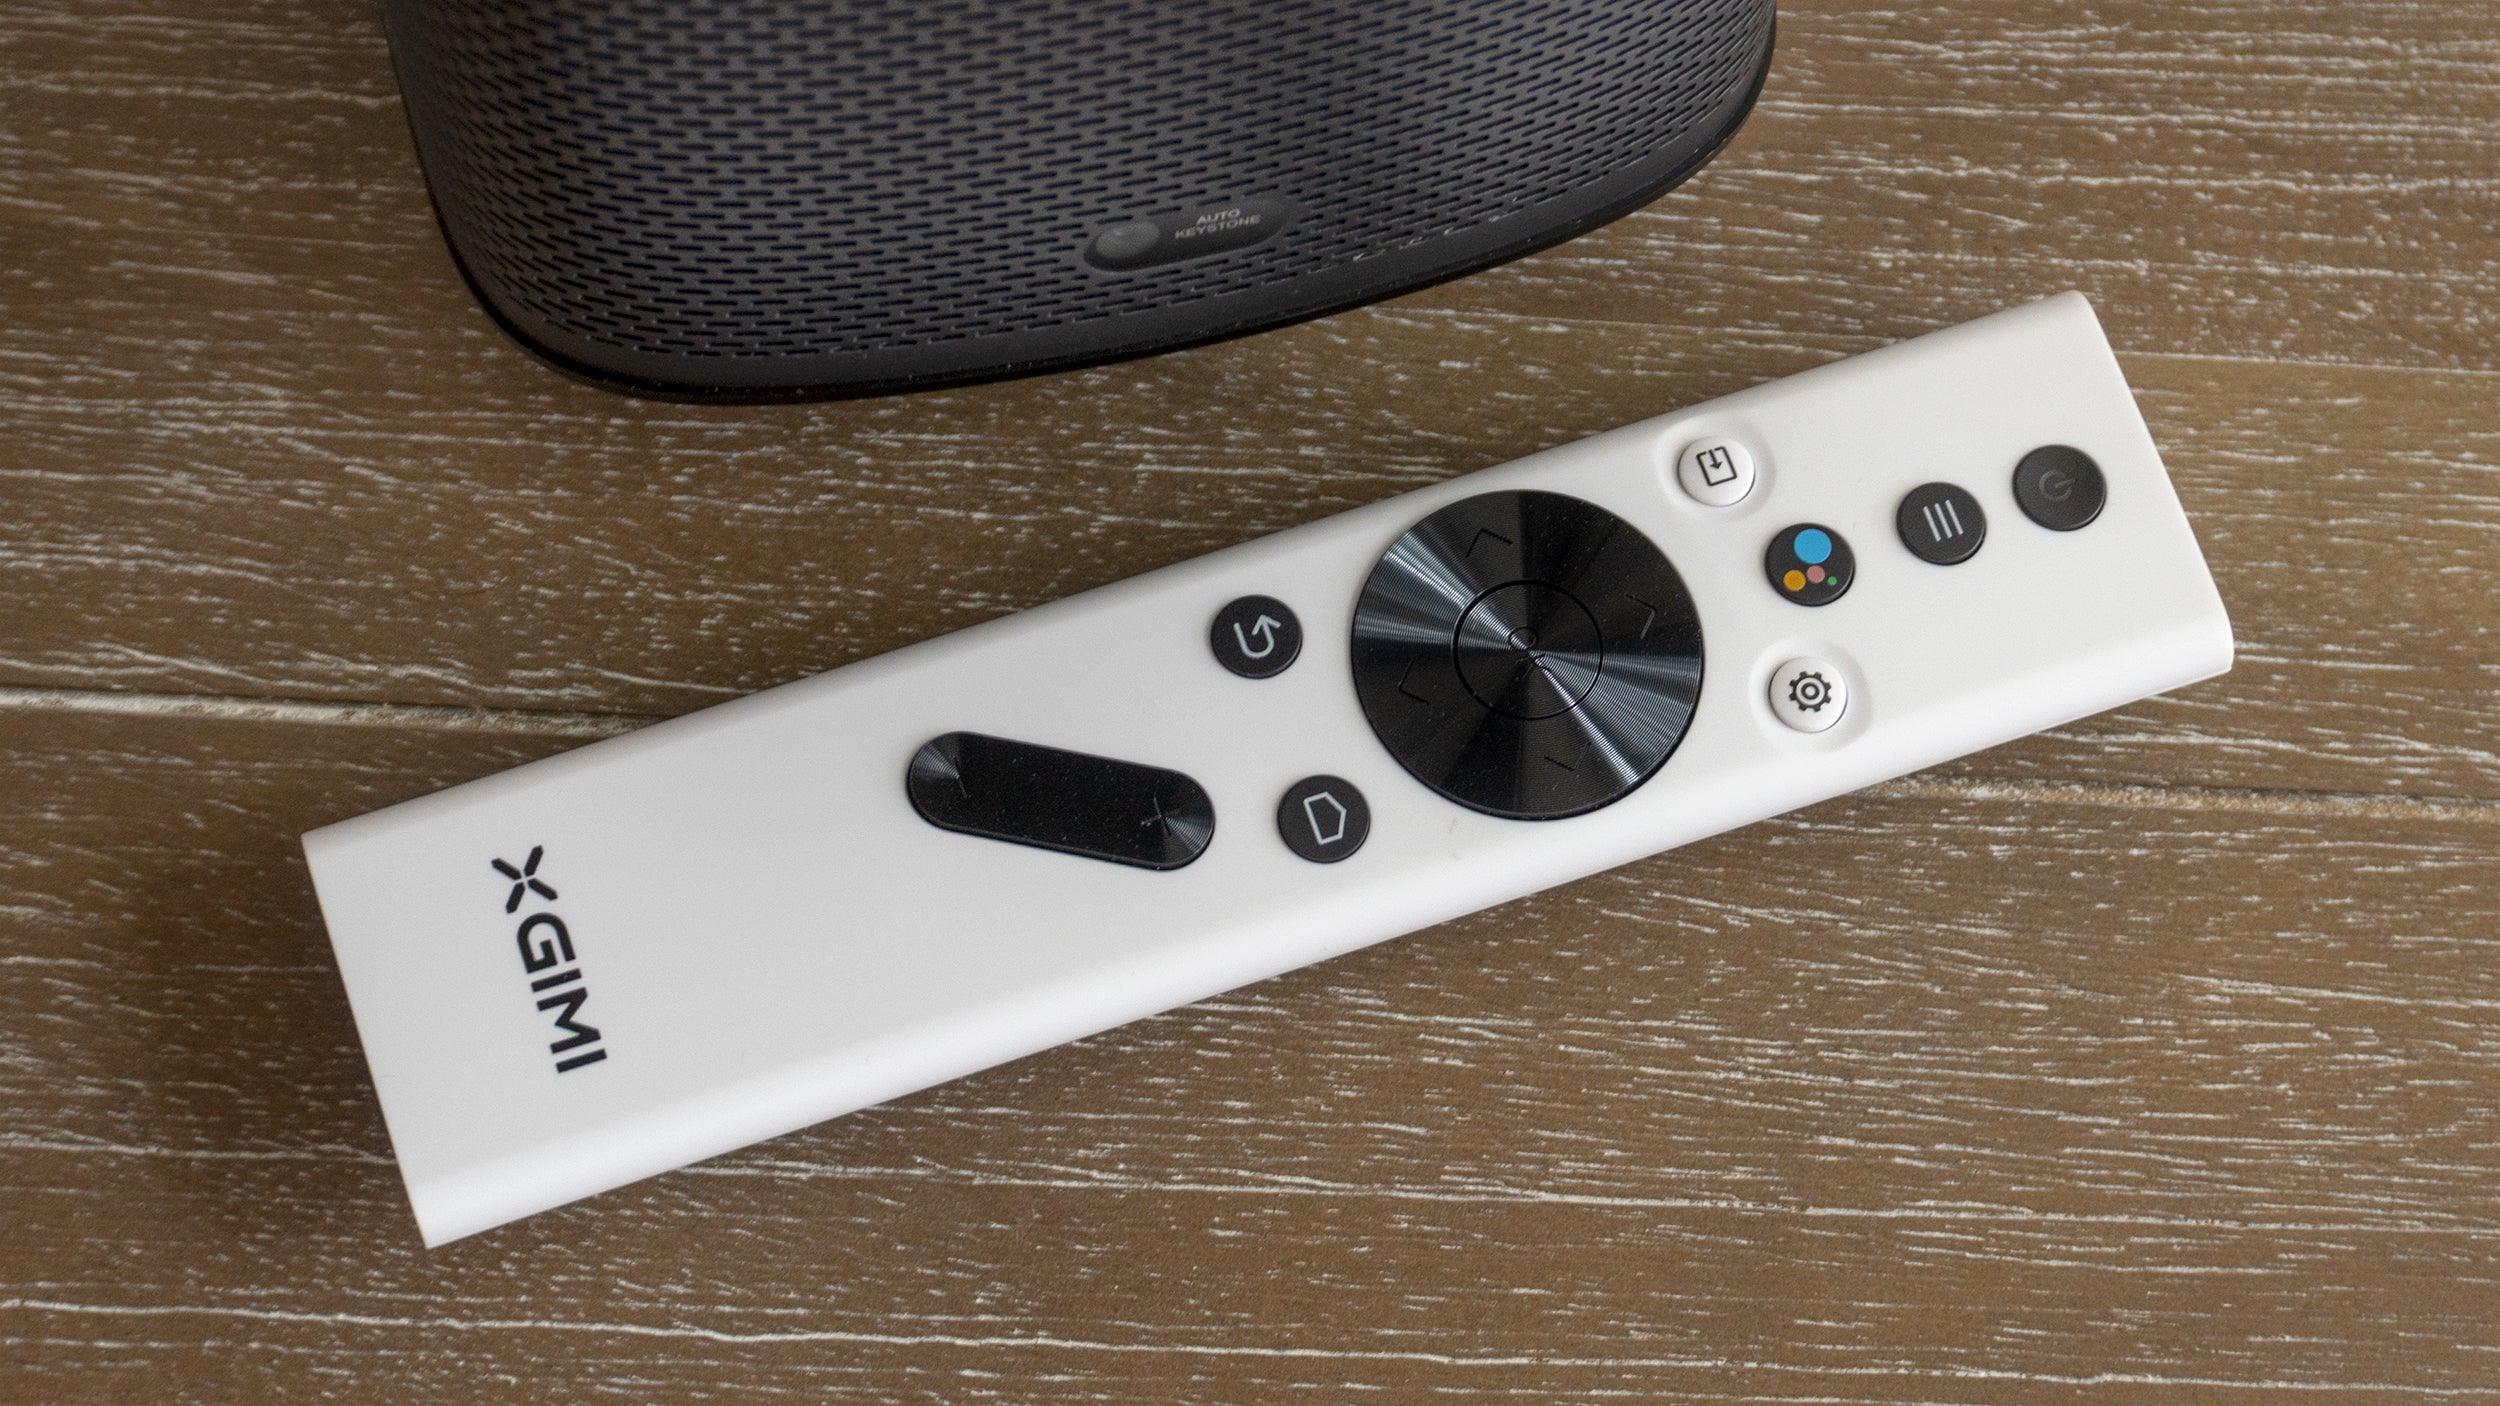 The remote included with the XGIMI Halo+ is an all plastic affair, but gets the job done. (Photo: Andrew Liszewski | Gizmodo)